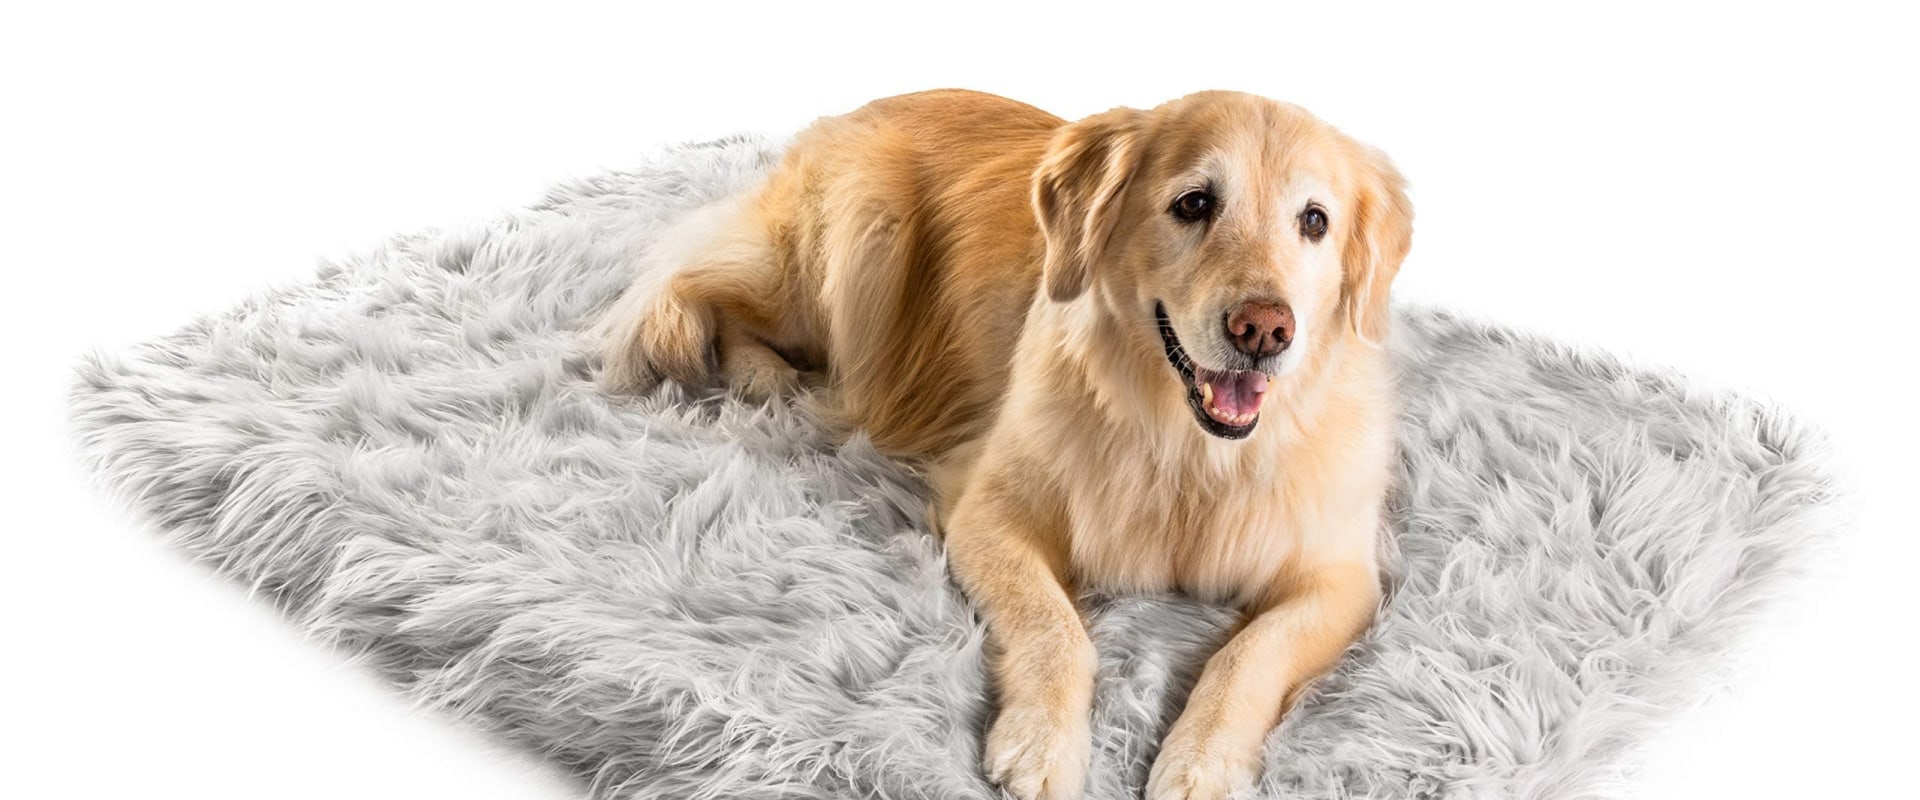 The Best Orthopedic Dog Beds for Your Furry Friend